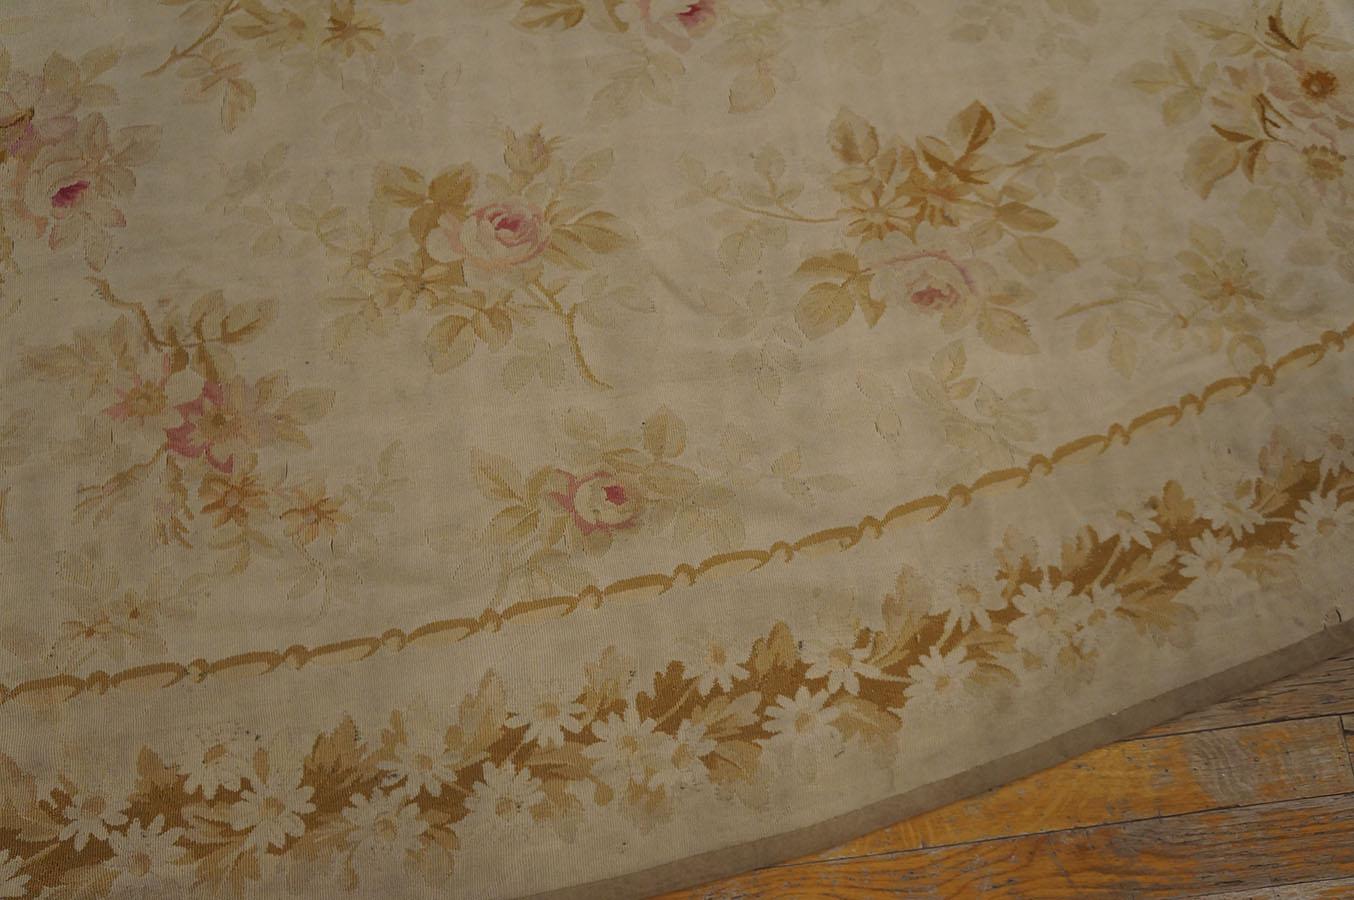 Late 19th Century French Aubusson Carpet ( 8' 4'' x 13' 4'' - 255 x 405 cm )  For Sale 5